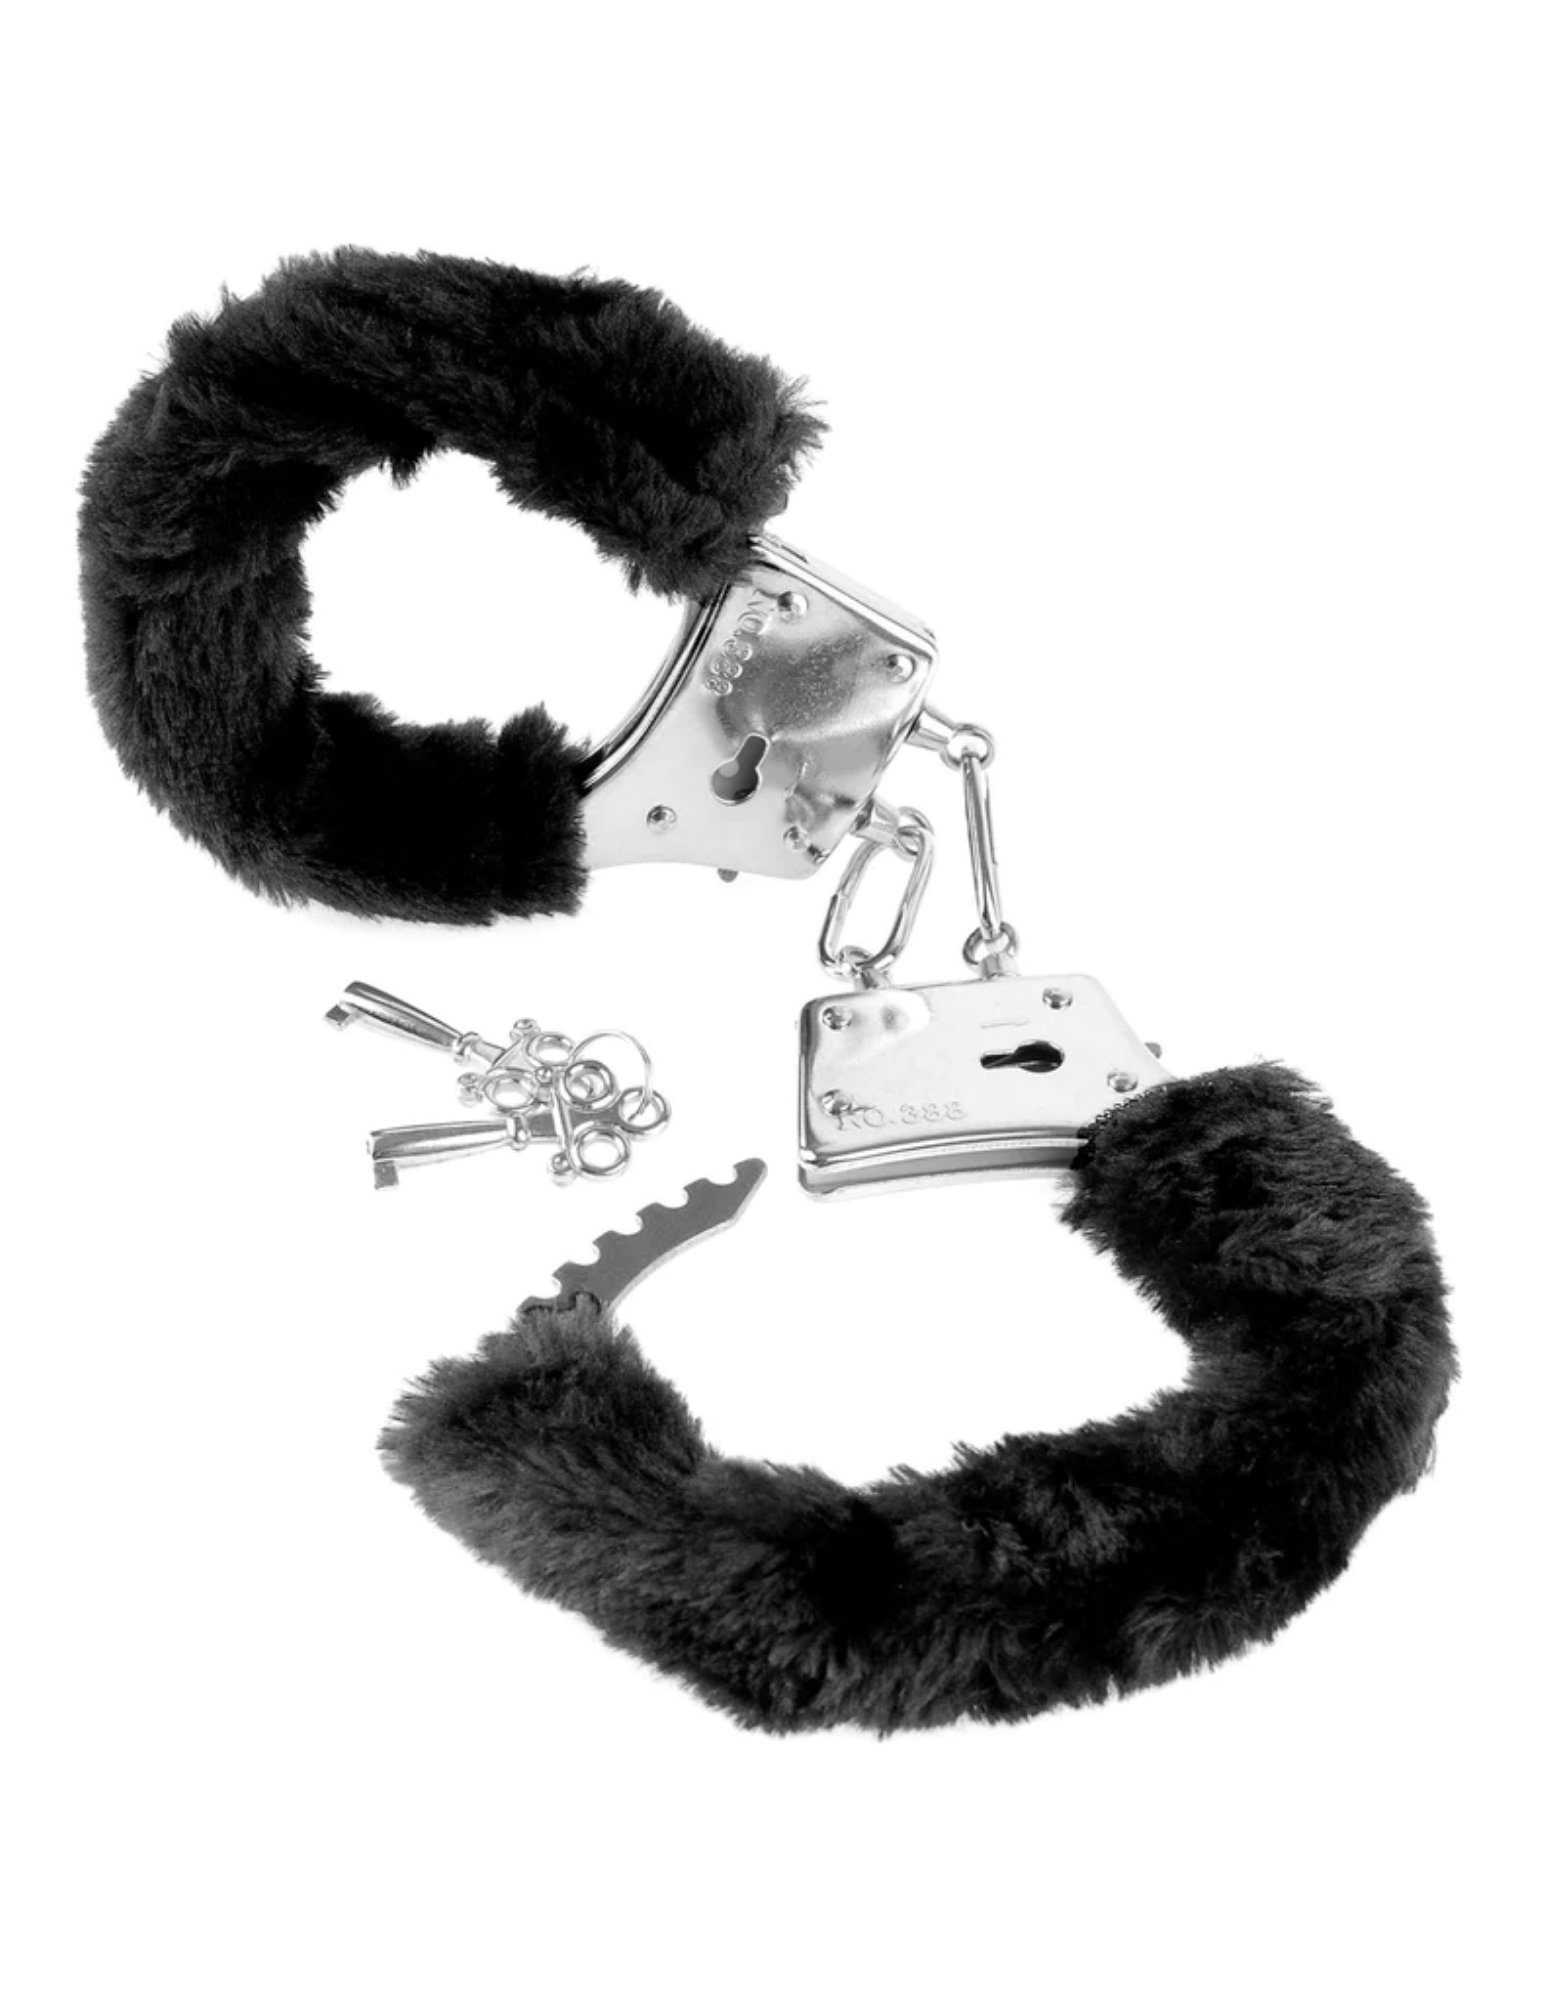 Photo of the Fetish Fantasy Series Beginner's Furry Cuffs from Pipedreams (black) and their keys.